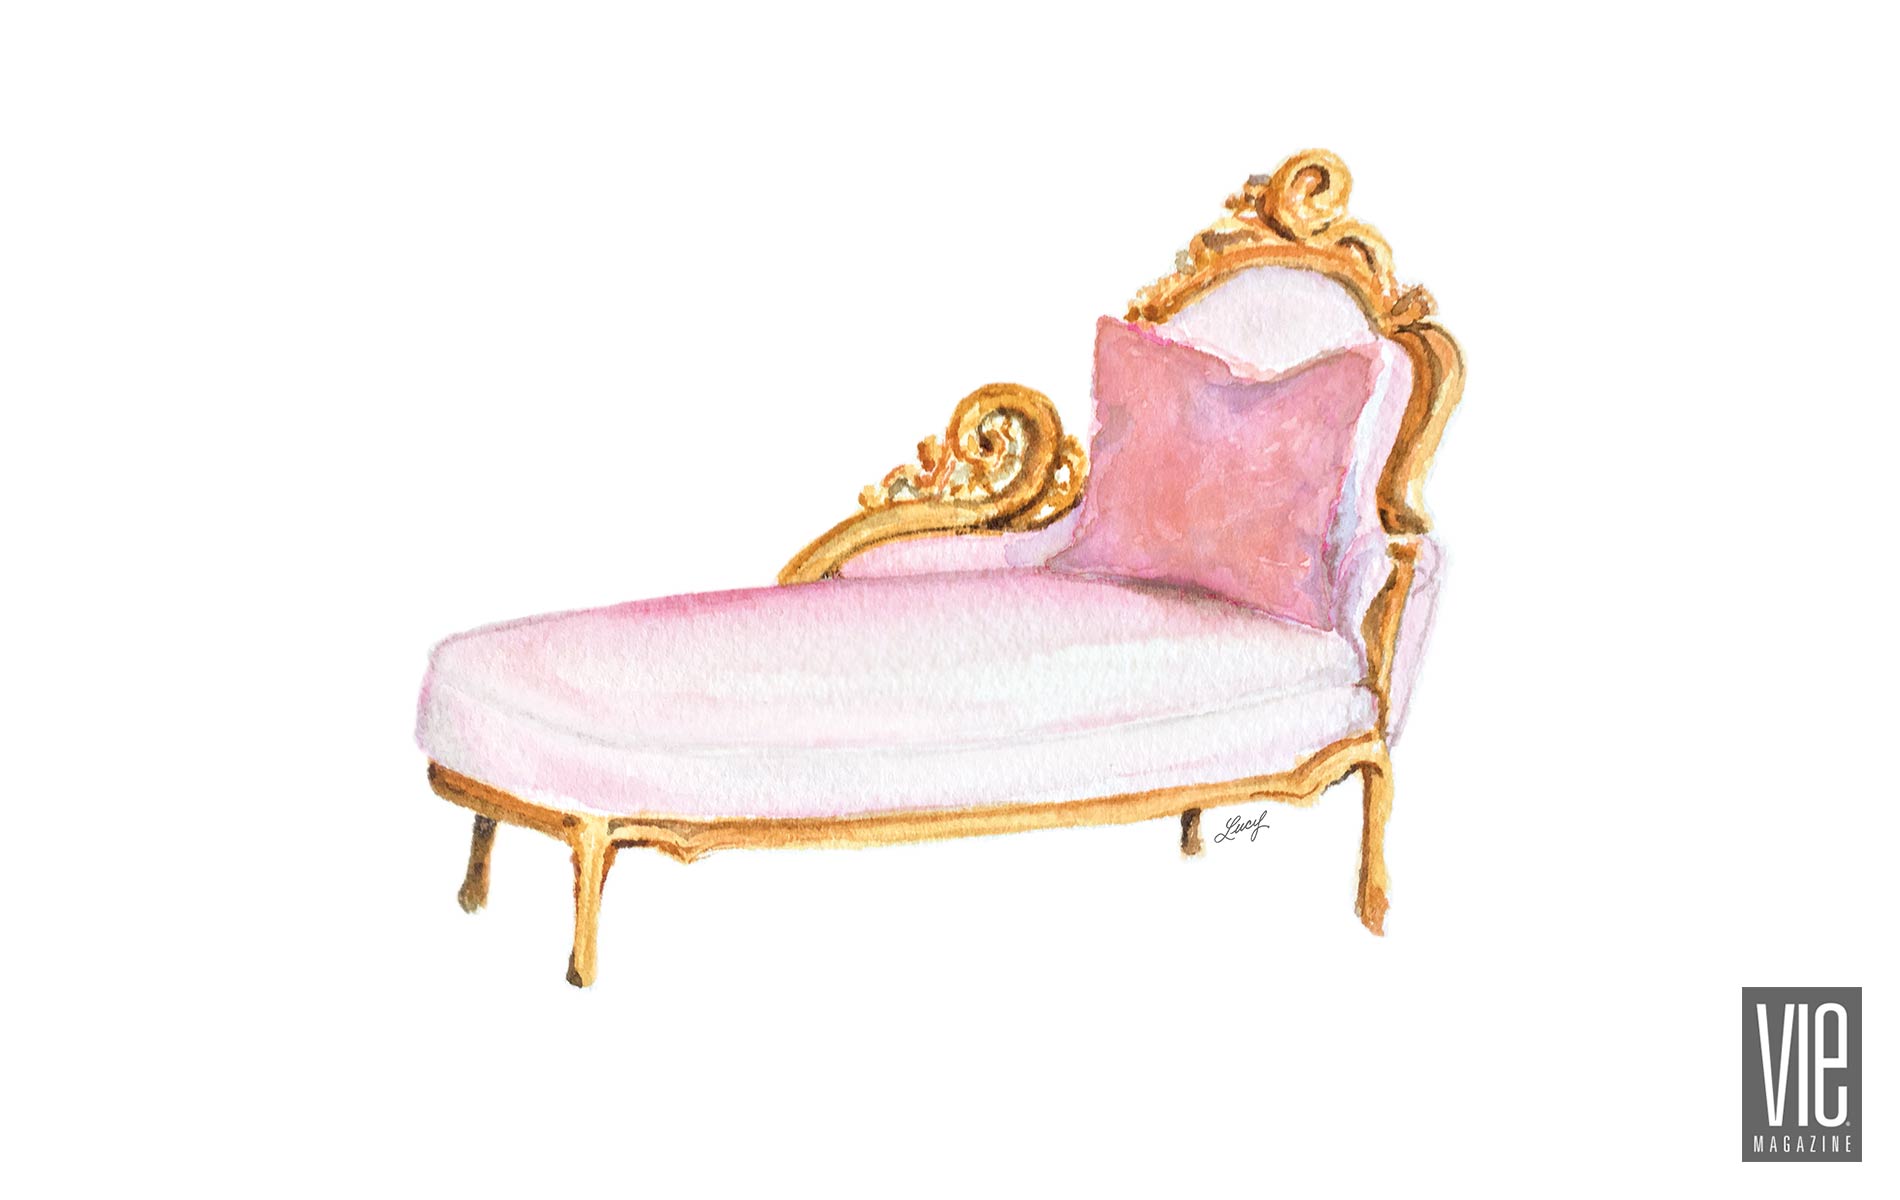 The Queen's chaise lounge Queen Esther First Lady Inspirational Column March 2017